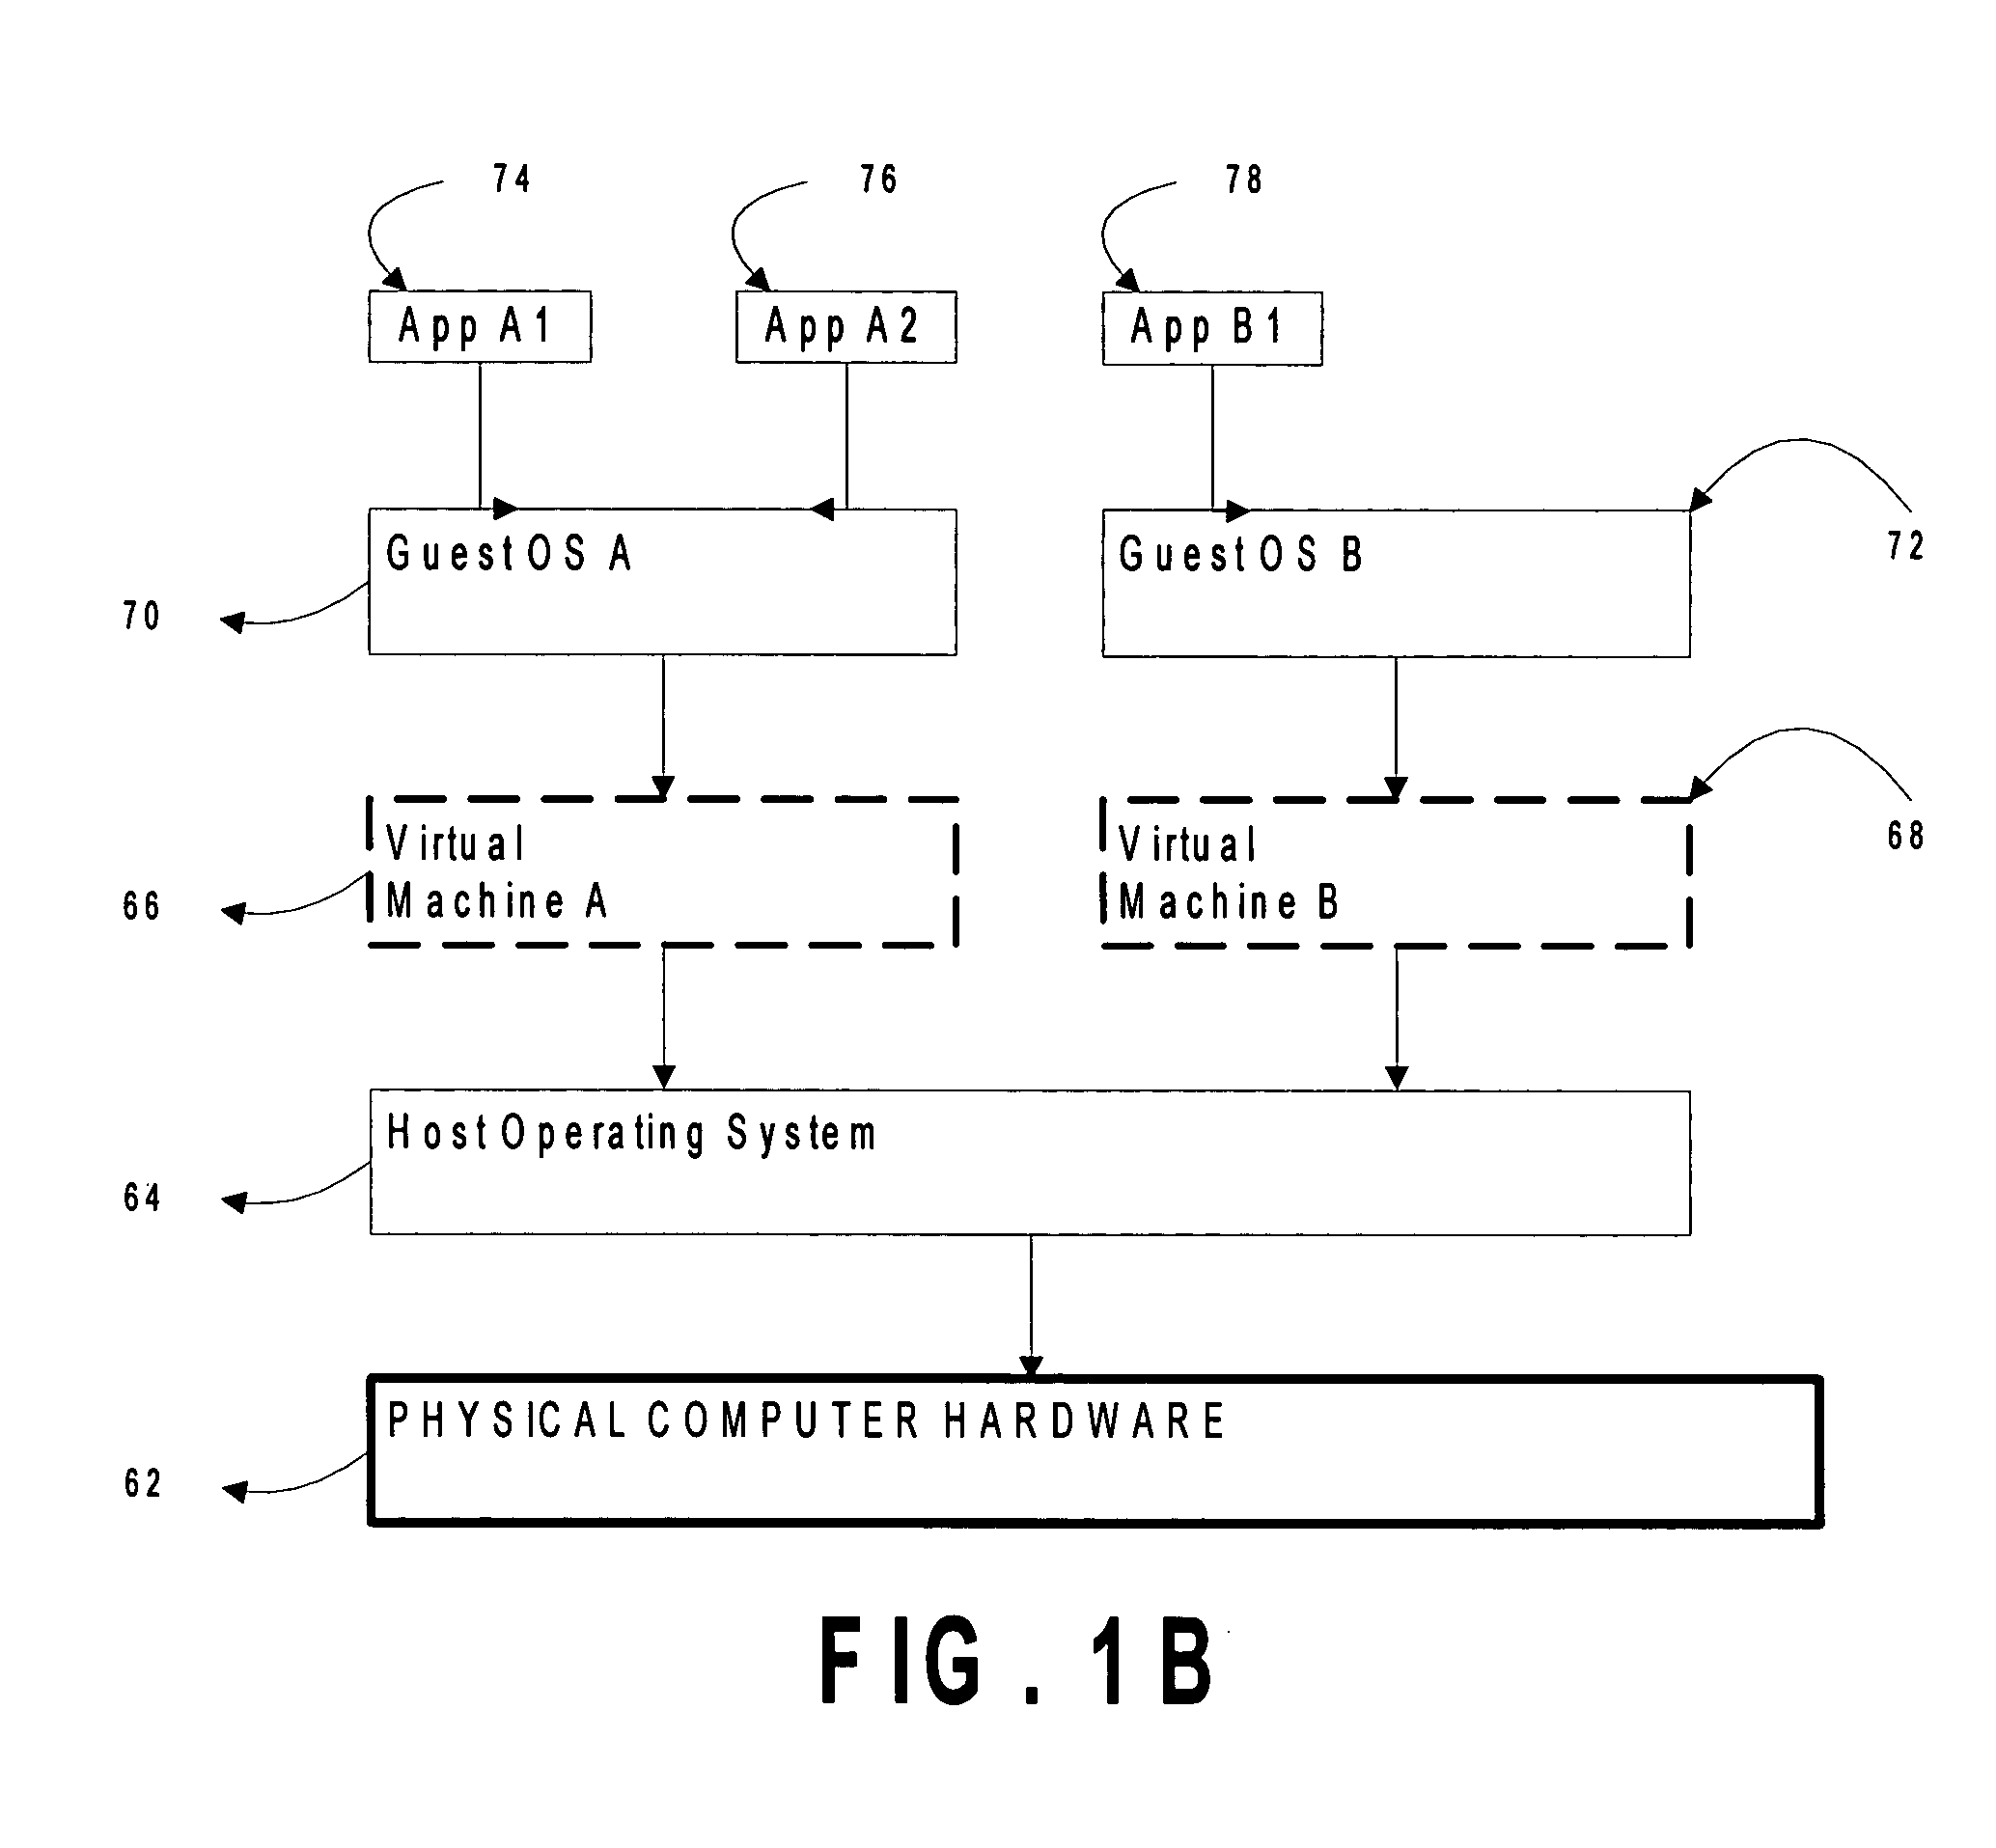 Virtual operating system device communication relying on memory access violations